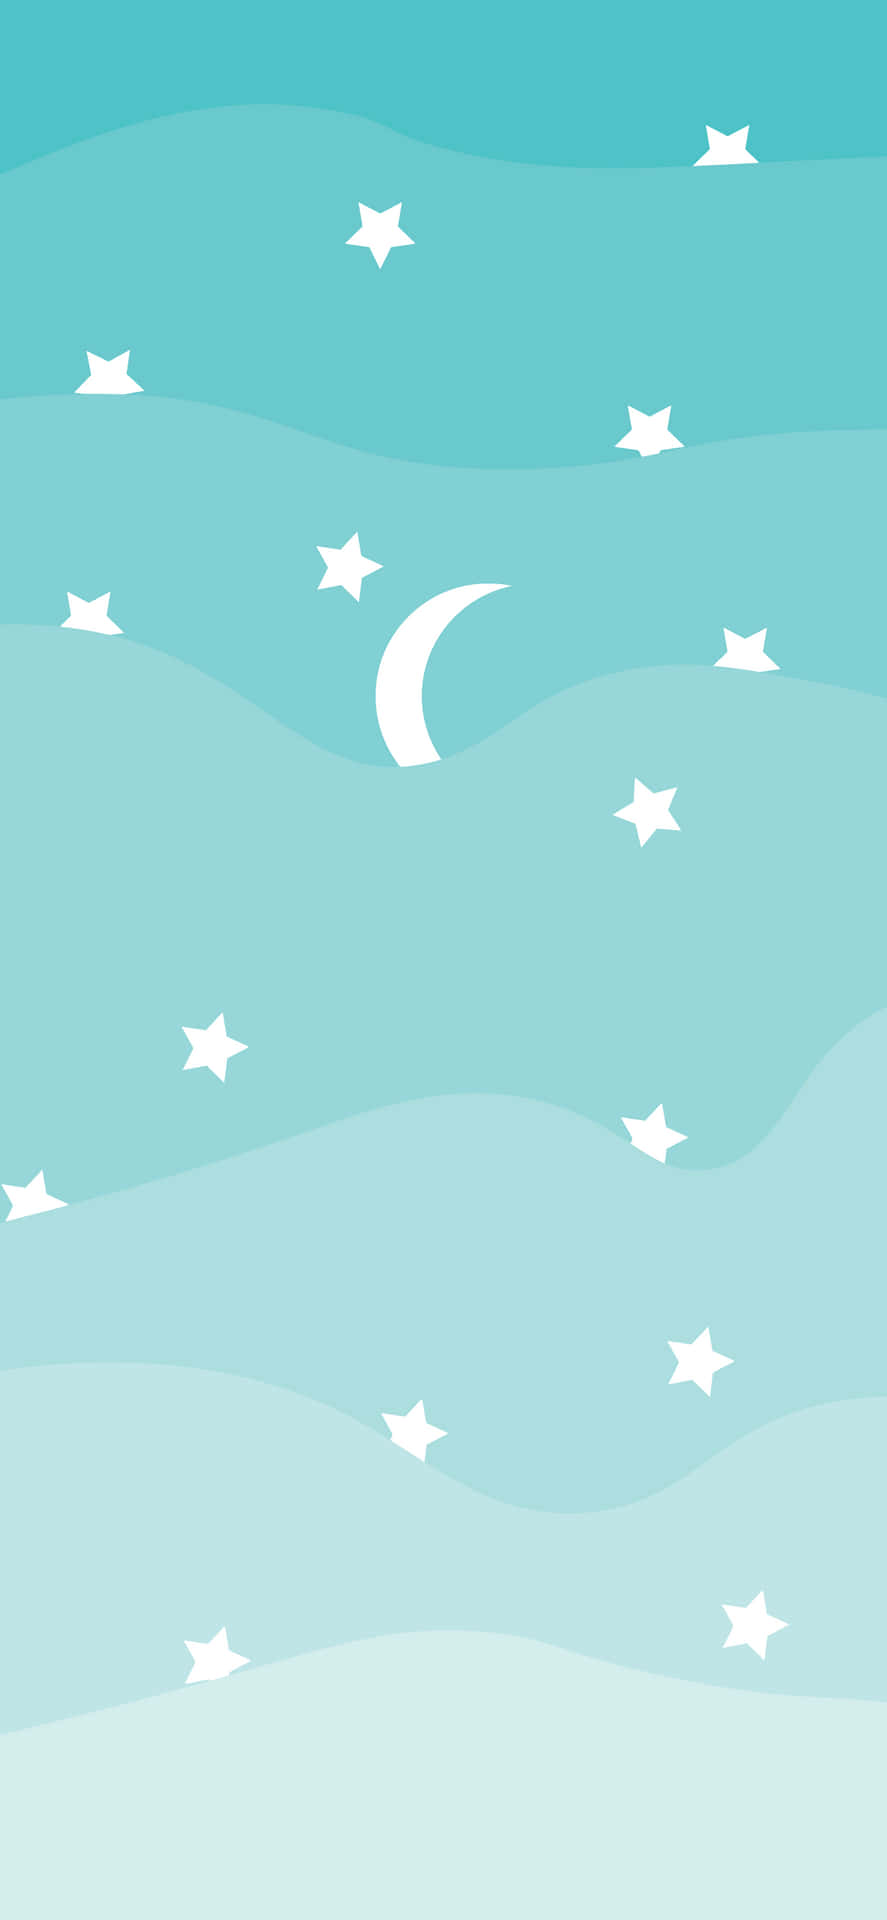 Download Cute iPhone Teal Sky With Moon Vector Art Wallpaper ...